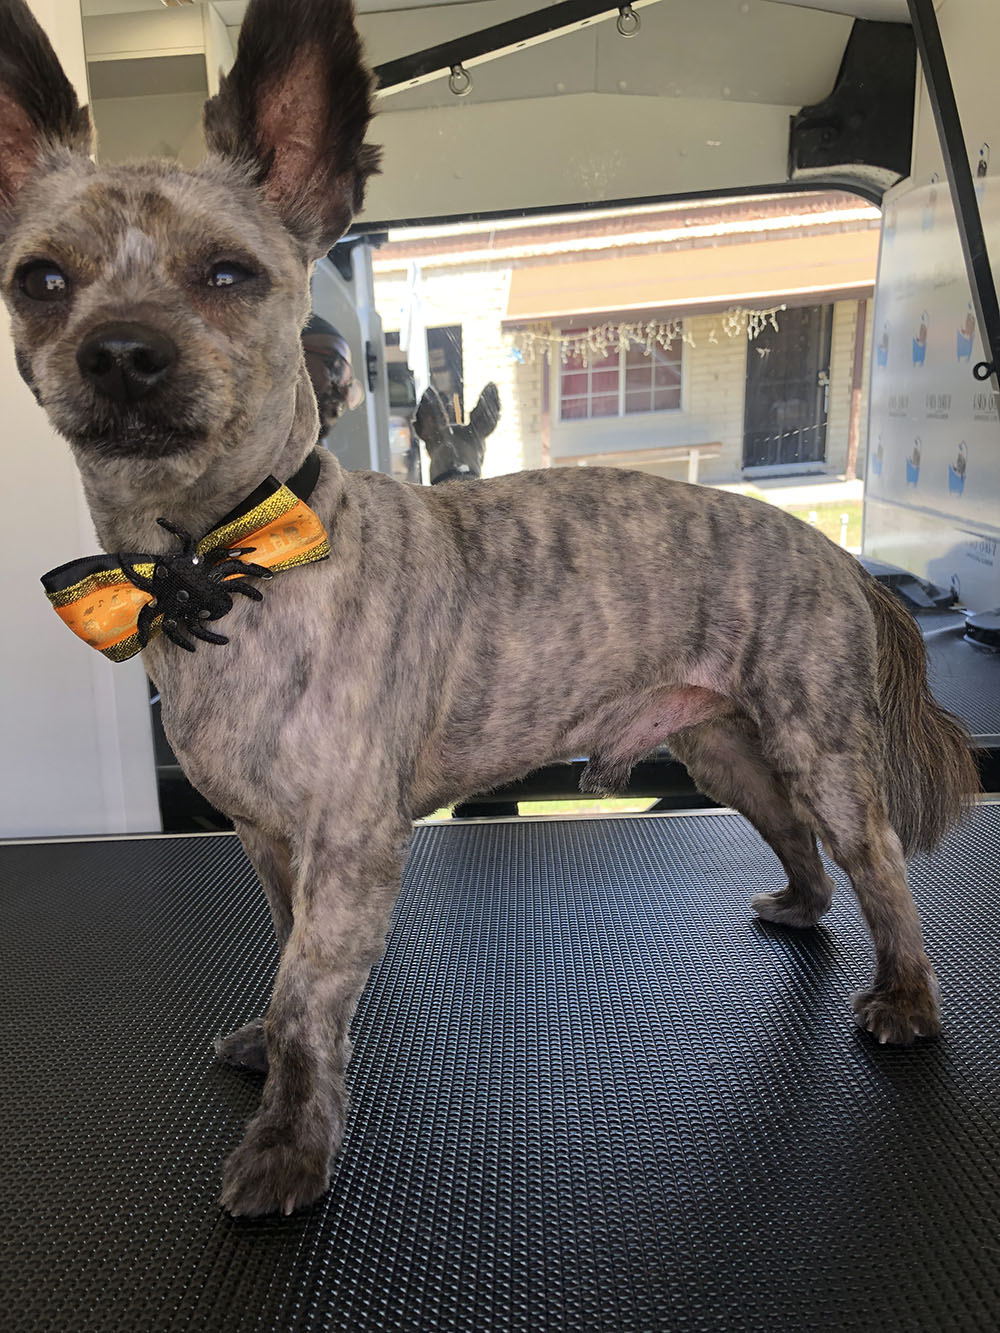 An Orange Tie on a Fully Groomed Dog